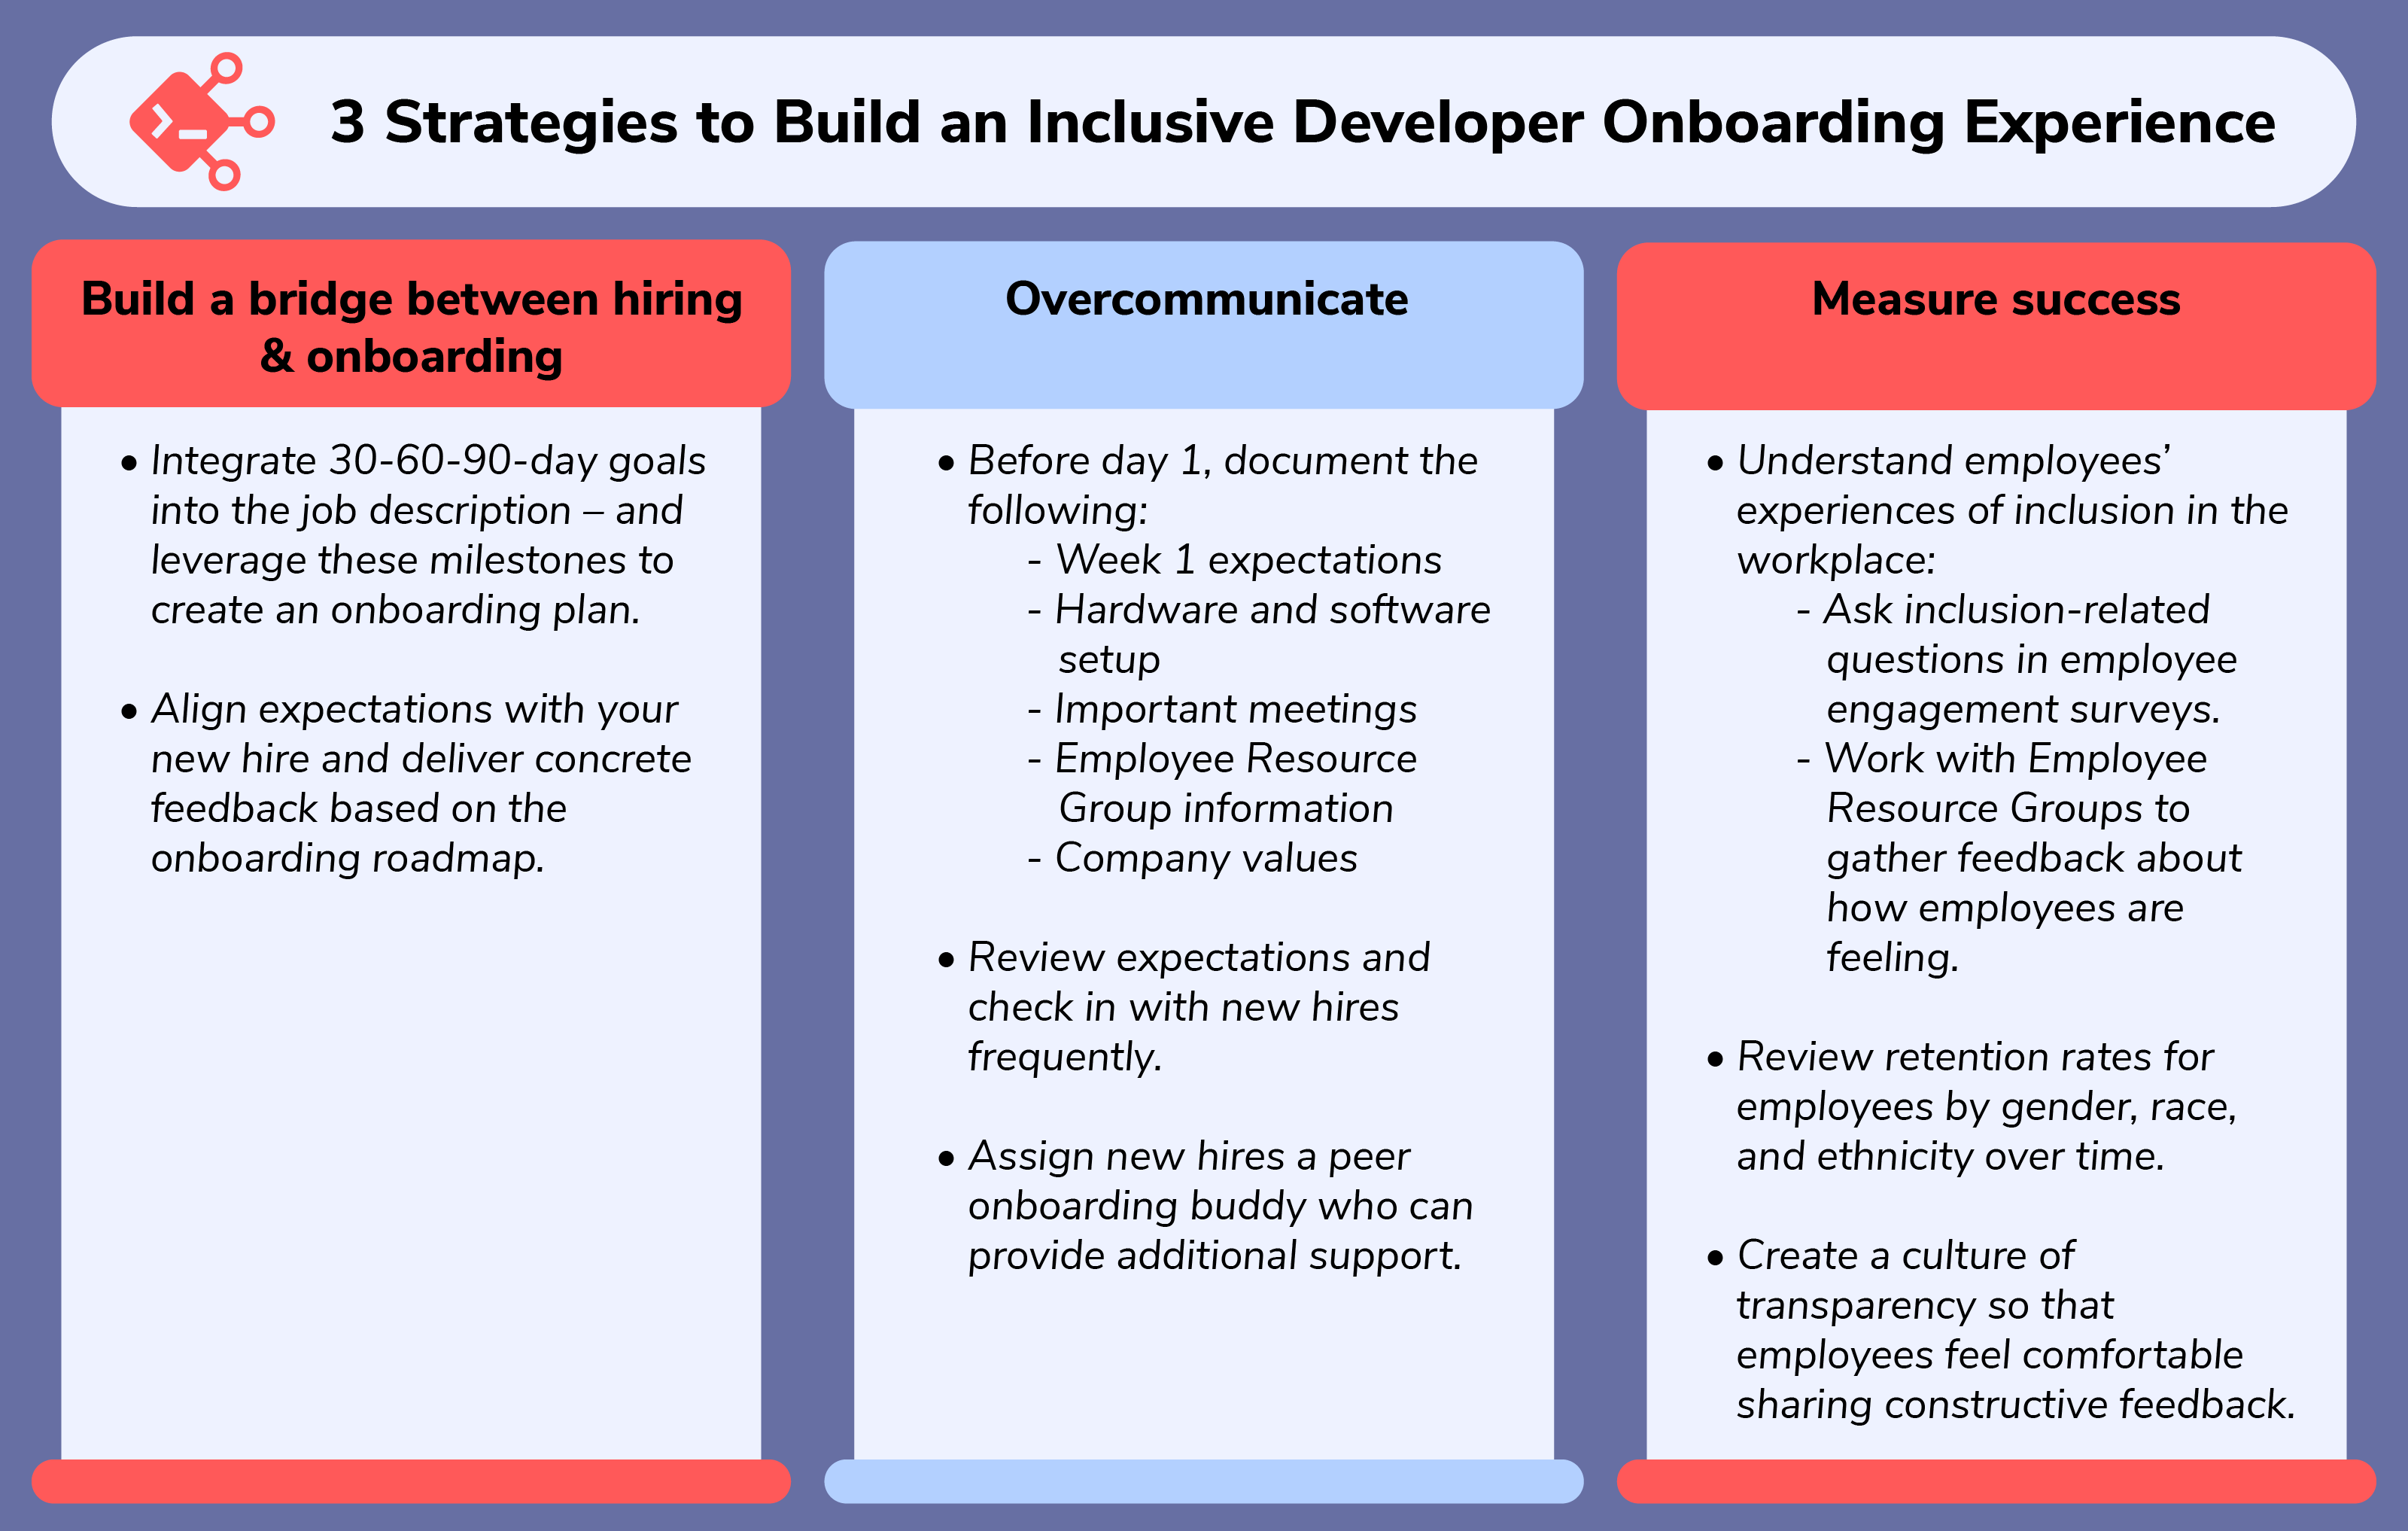 3 Strategies to build an inclusive developer onboarding experience